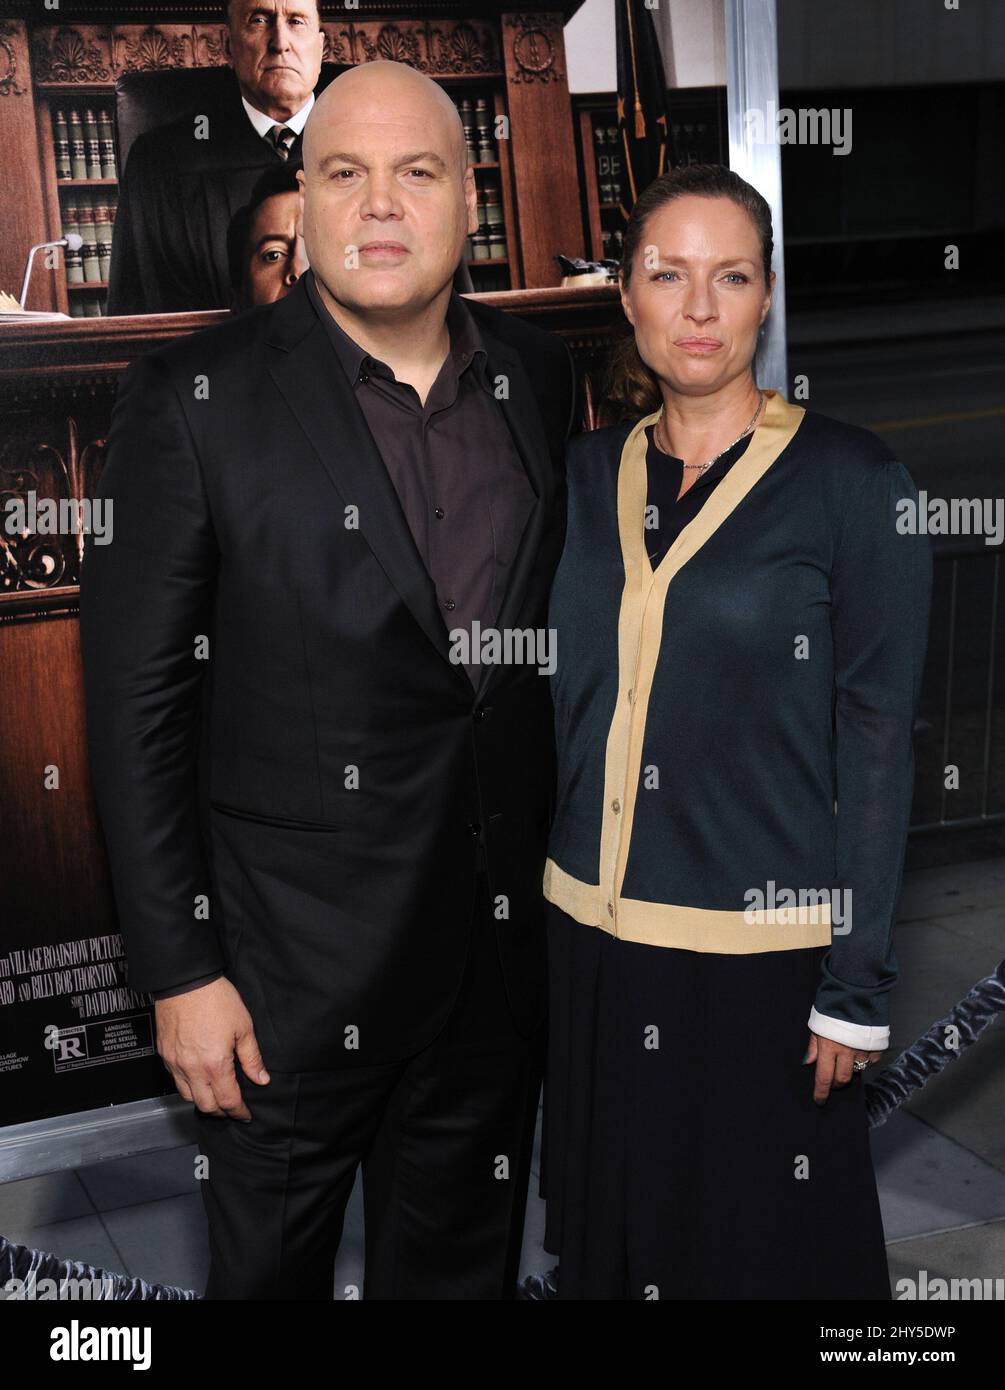 Vincent D'Onofrio e Carin van der Donk frequentano il 'Giudice' Los Angeles Premiere all'Academy of Motion Pictures, Beverly Hills, CA, 1 ottobre 2014. Foto Stock